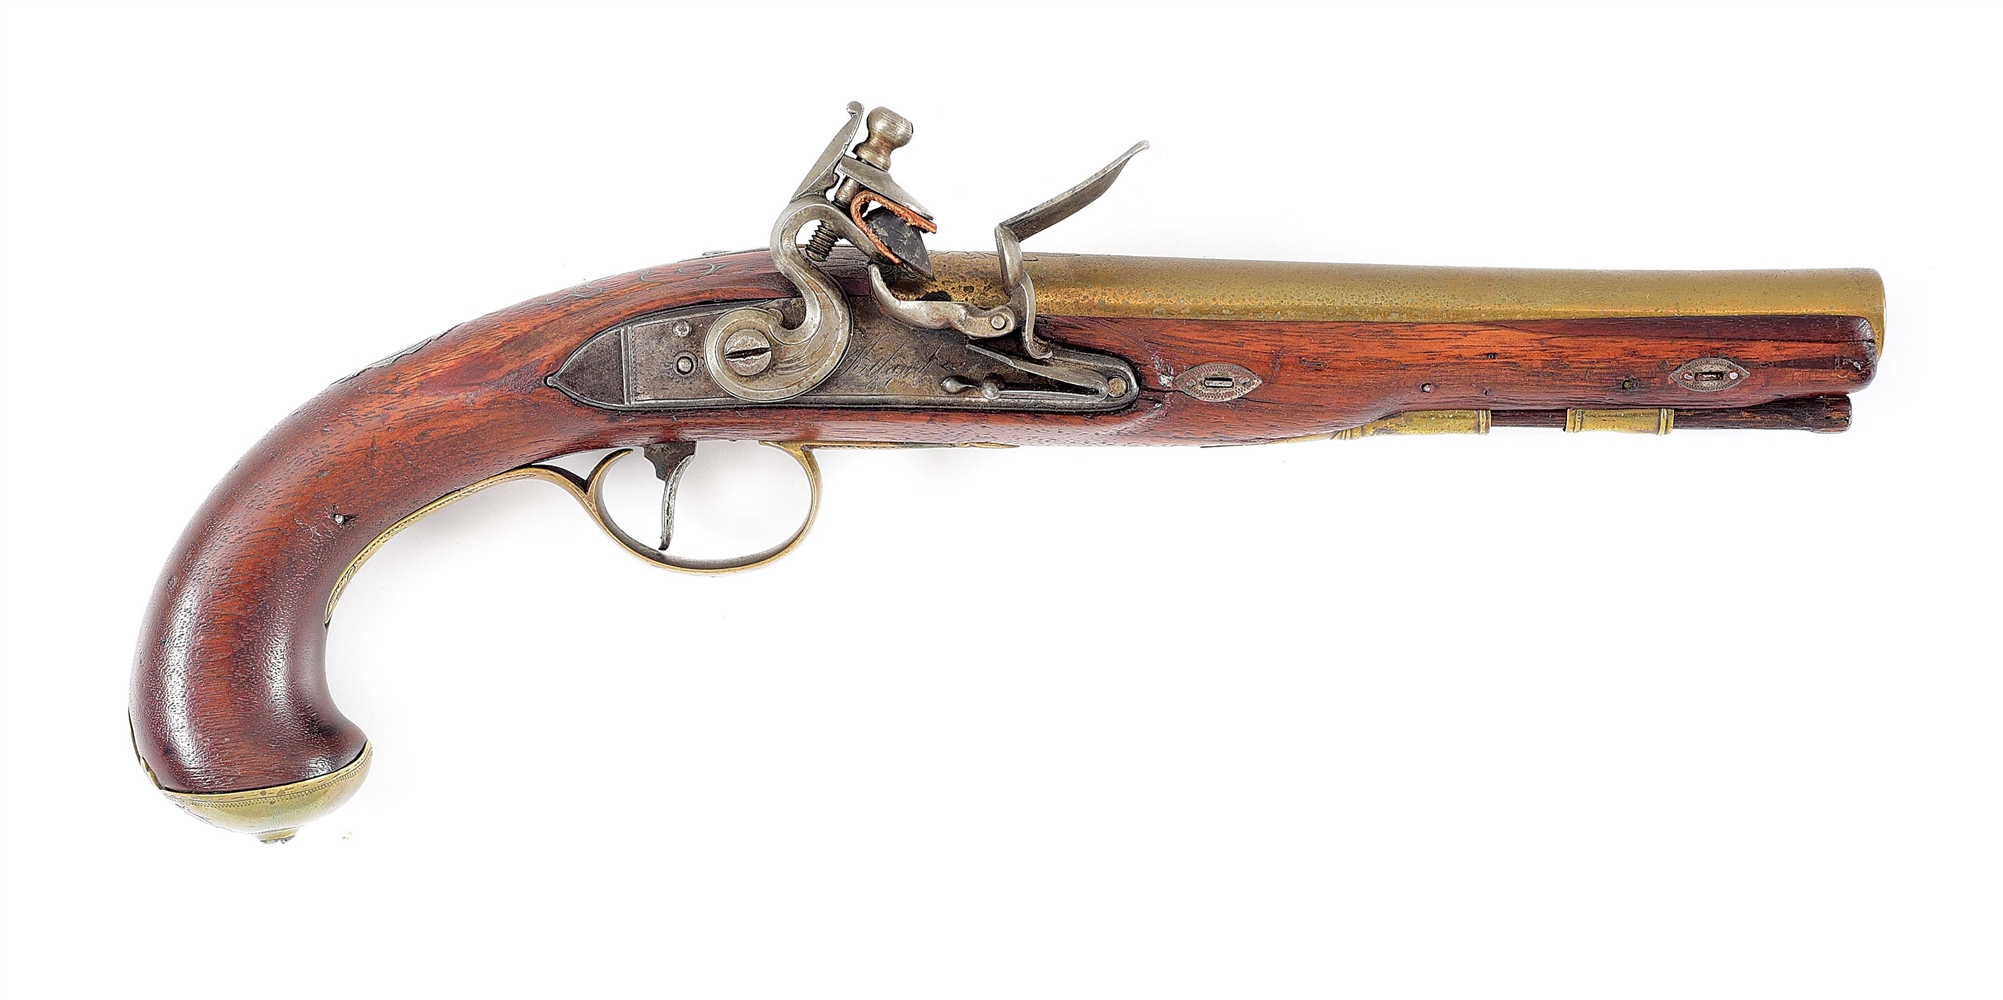 (A) AMERICAN STOCKED PISTOL WITH KETLAND LOCK, SILVER WIRE INLAY AND THUMBPIECE.